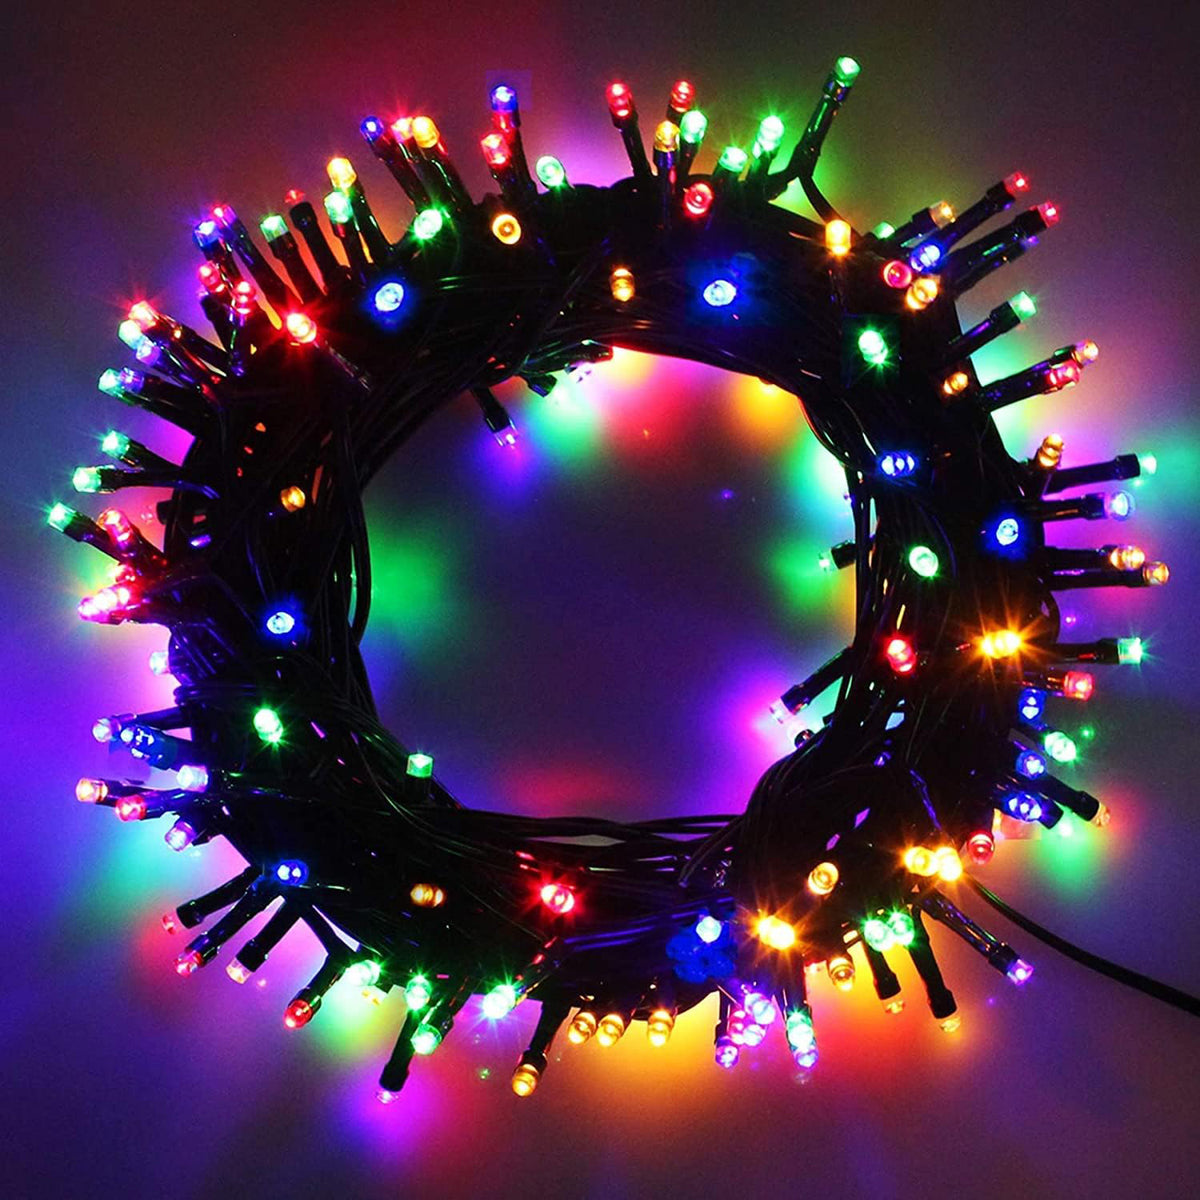 DecorTwist LED String Light for Home and Office Decor| Indoor & Outdoor Decorative Lights|Christmas |Diwali |Wedding | Christmas | Diwali | Wedding |16 Meter Length (16 MTR, 1)